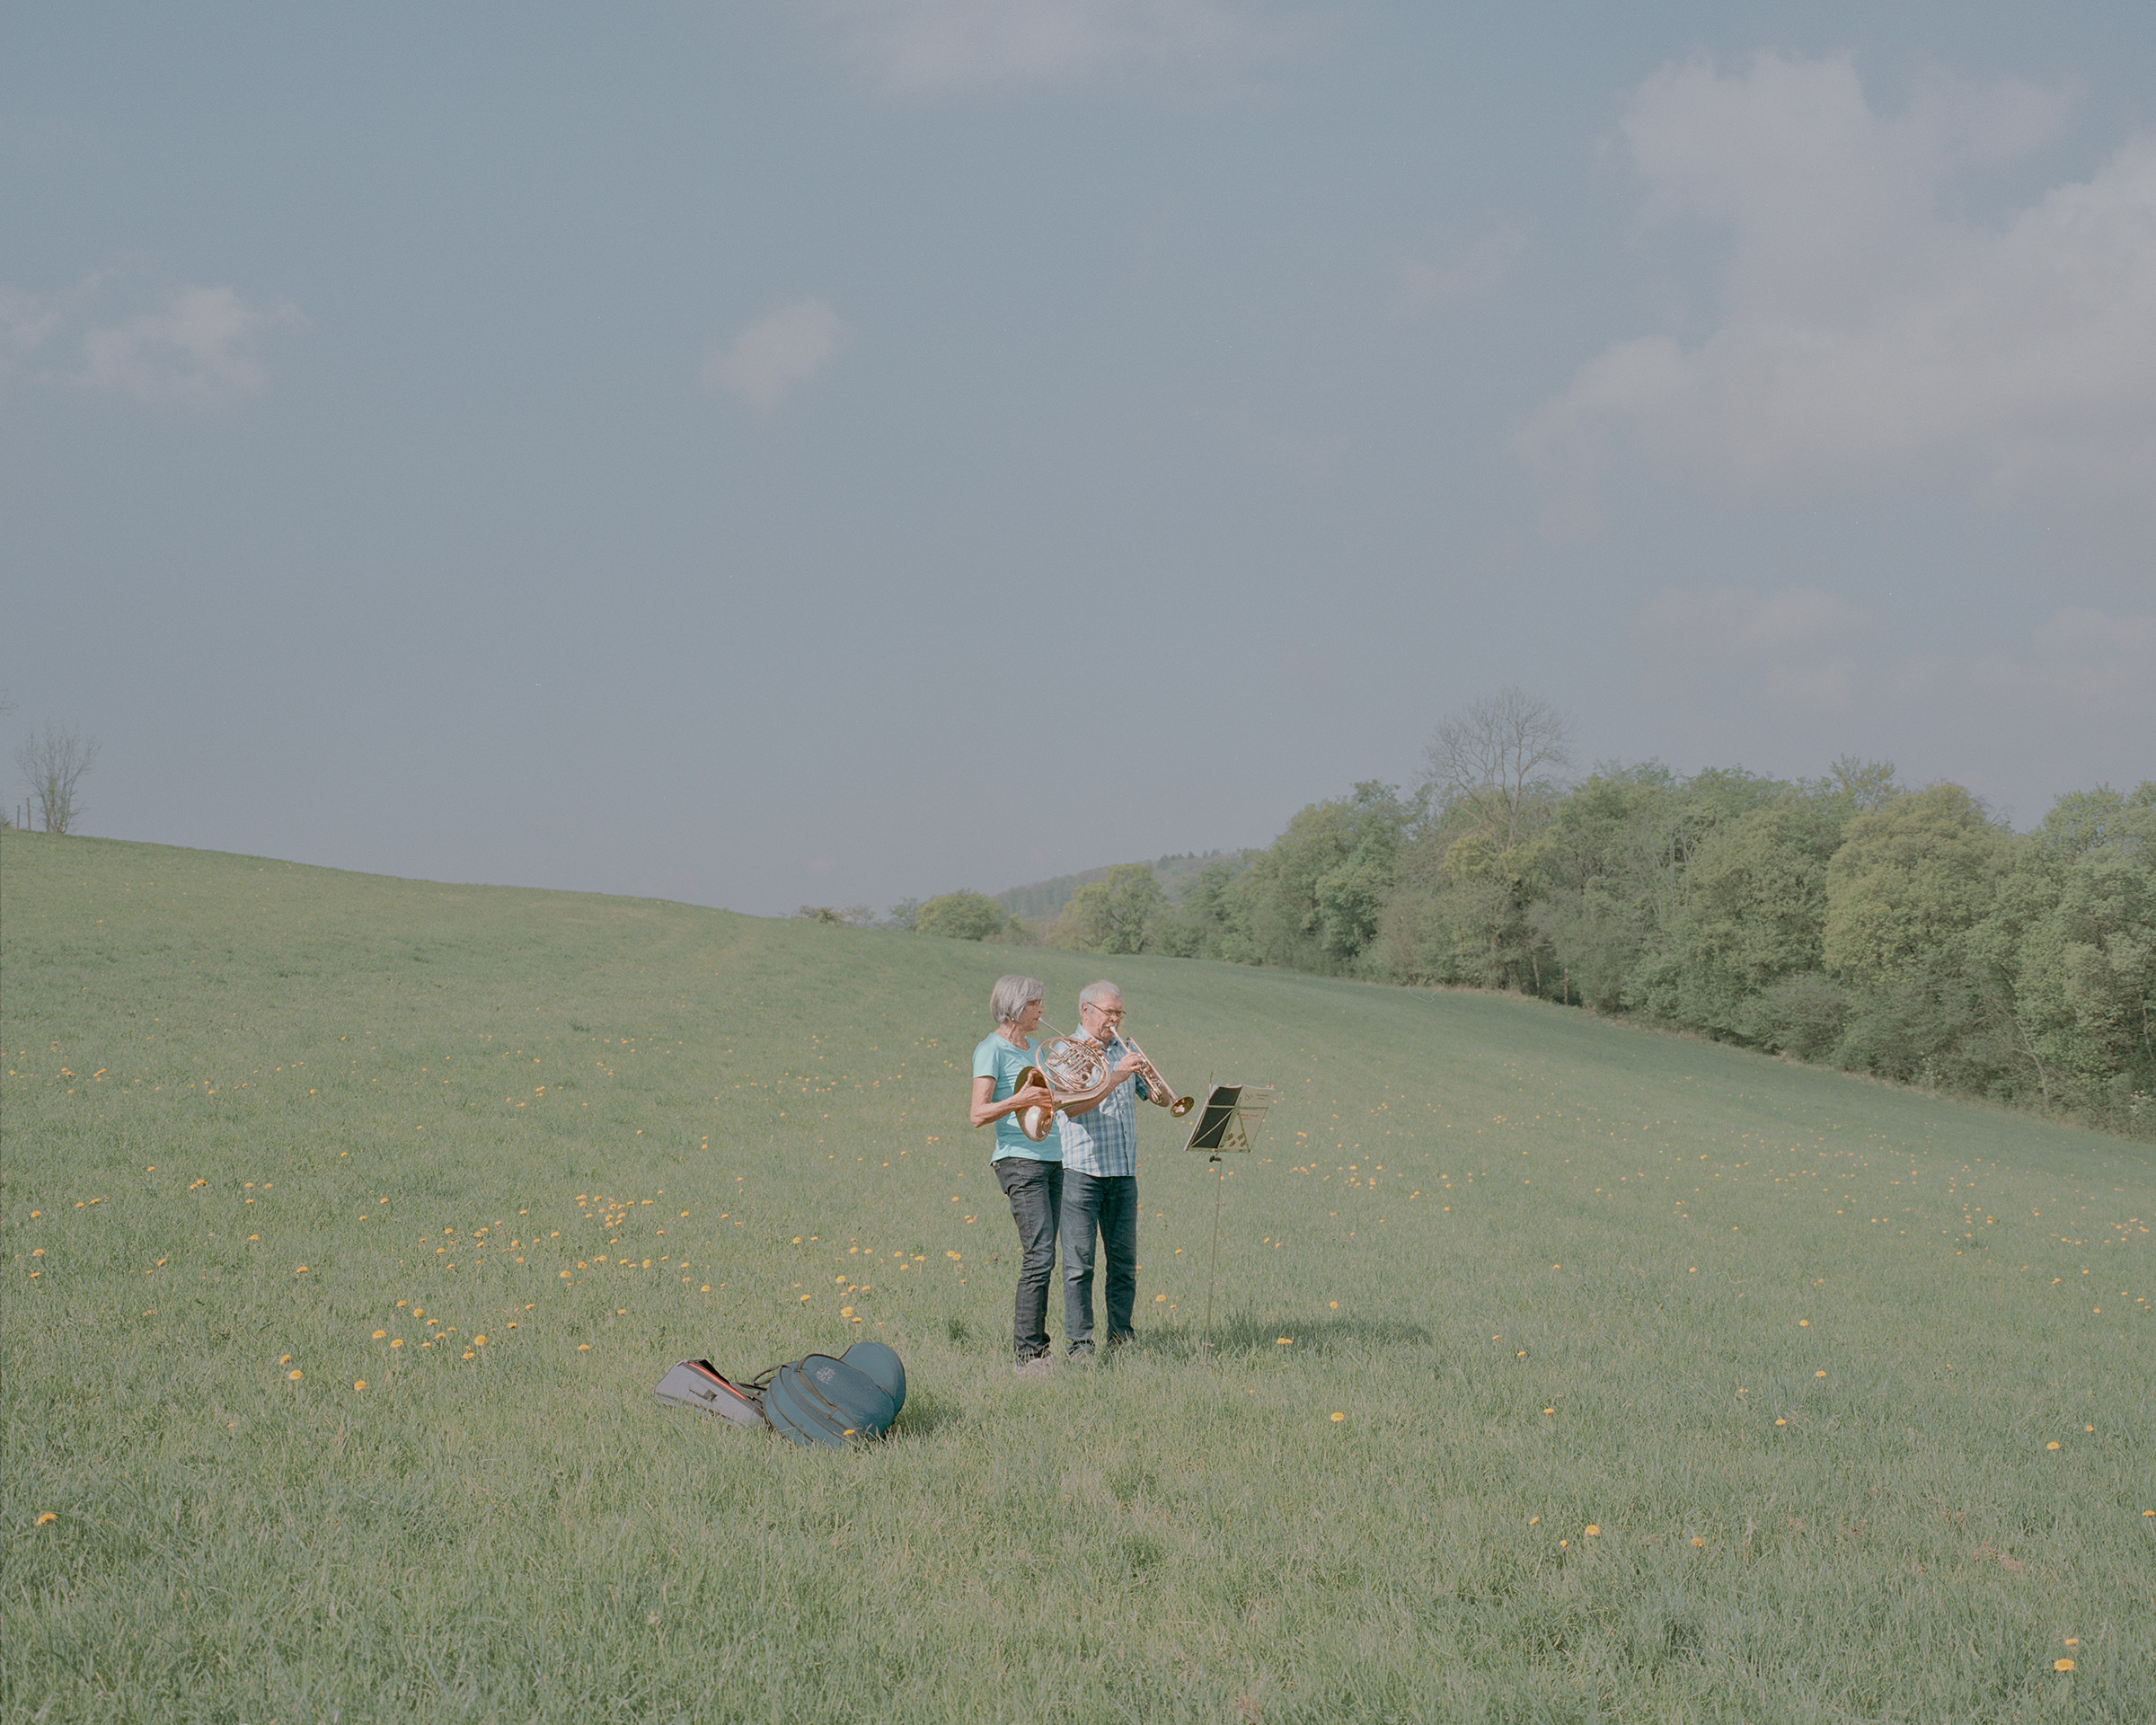 Every Sunday, members of a church brass band "Posaunenchor Essingen” play at the same time around the town Essingen, as they cannot meet in person. Andrea and Rainer Zube, pictured here on April 19, play in a meadow. (Ingmar Björn Nolting—DOCKS Collective)